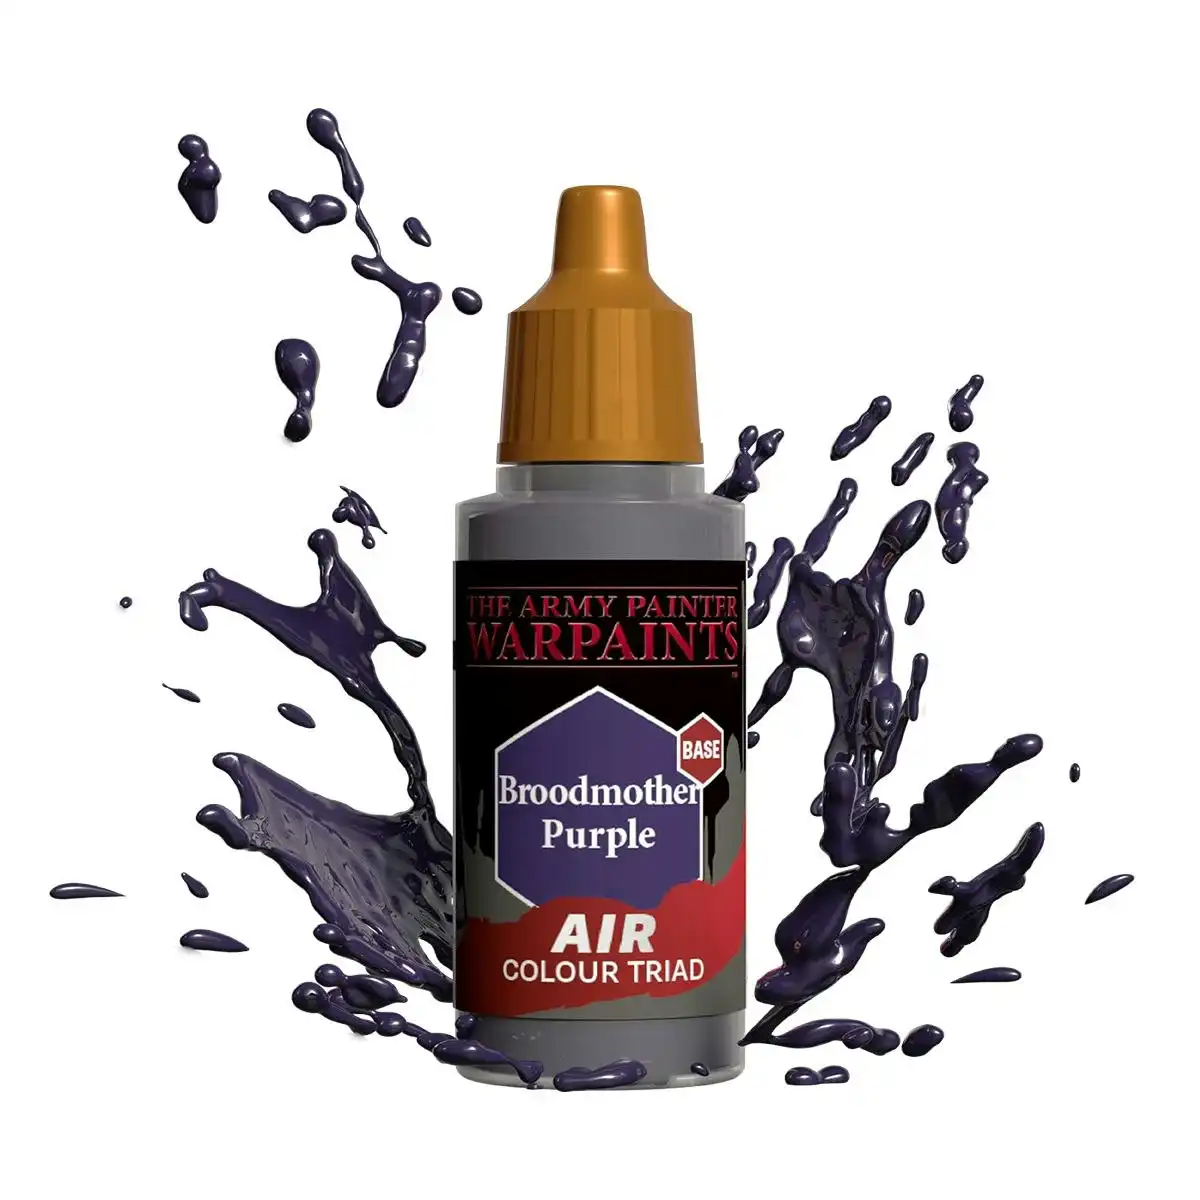 Army Painter Warpaints - Air Broodmother Purple Acrylic Paint 18ml